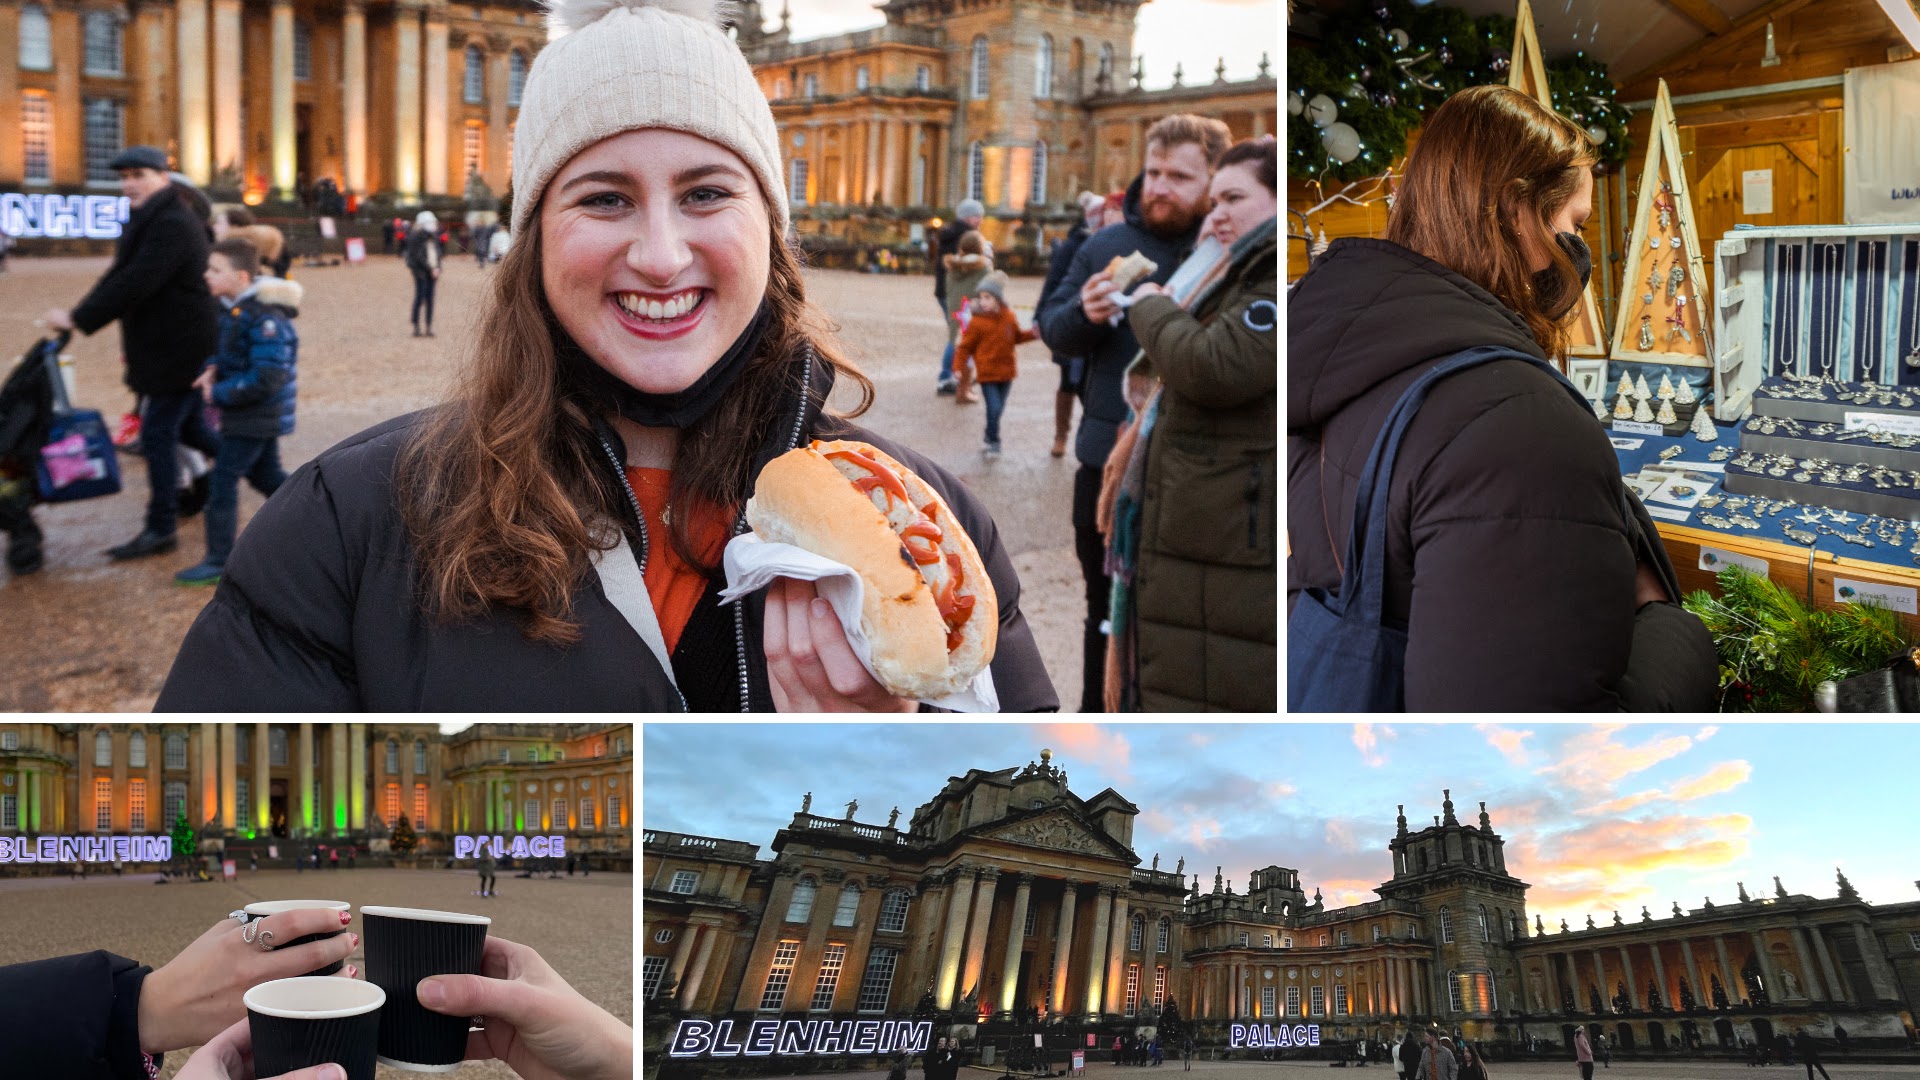 Left to right, top to bottom: Image of girl smiling at camera in bobble hat holding hotdog in front of Blenhiem Palace. Girl wearing mask browsing at jewellery shop. 3 hands holding cups in front of Blenhiem Palace. Wide angle of Blenhiem Palace in dusk